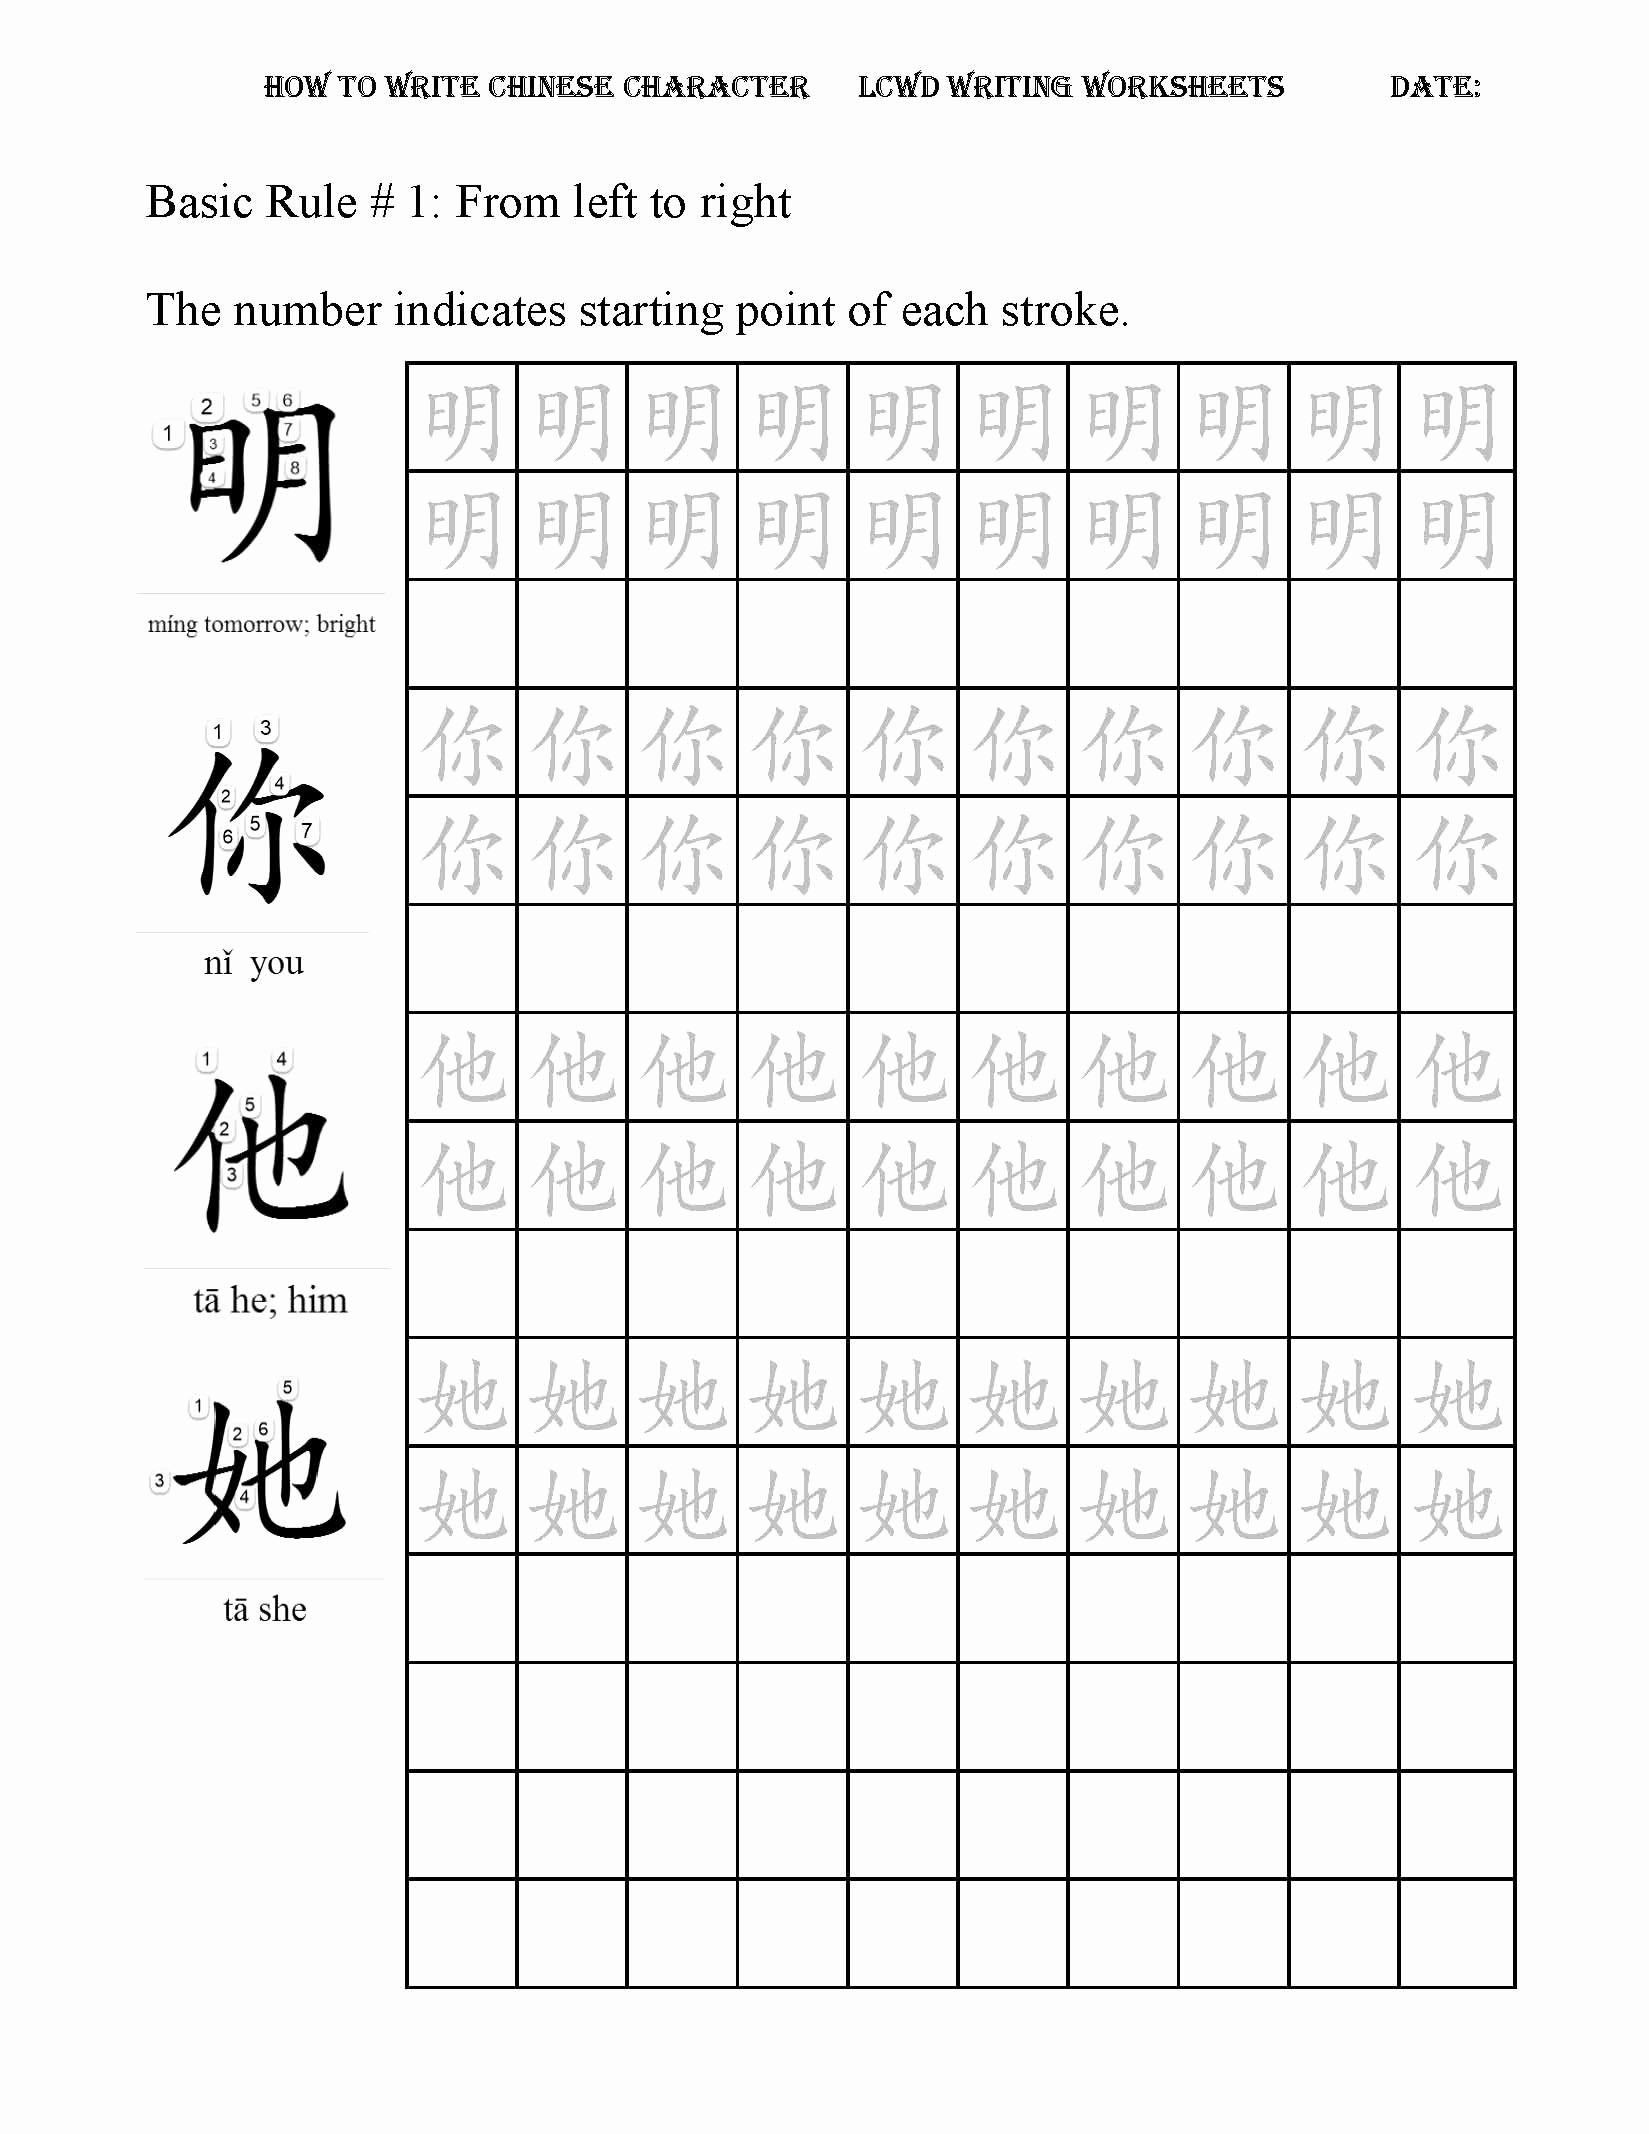 Learning Chinese Worksheets Unique How to Write Chinese Character 18 Rules Writing Worksheets